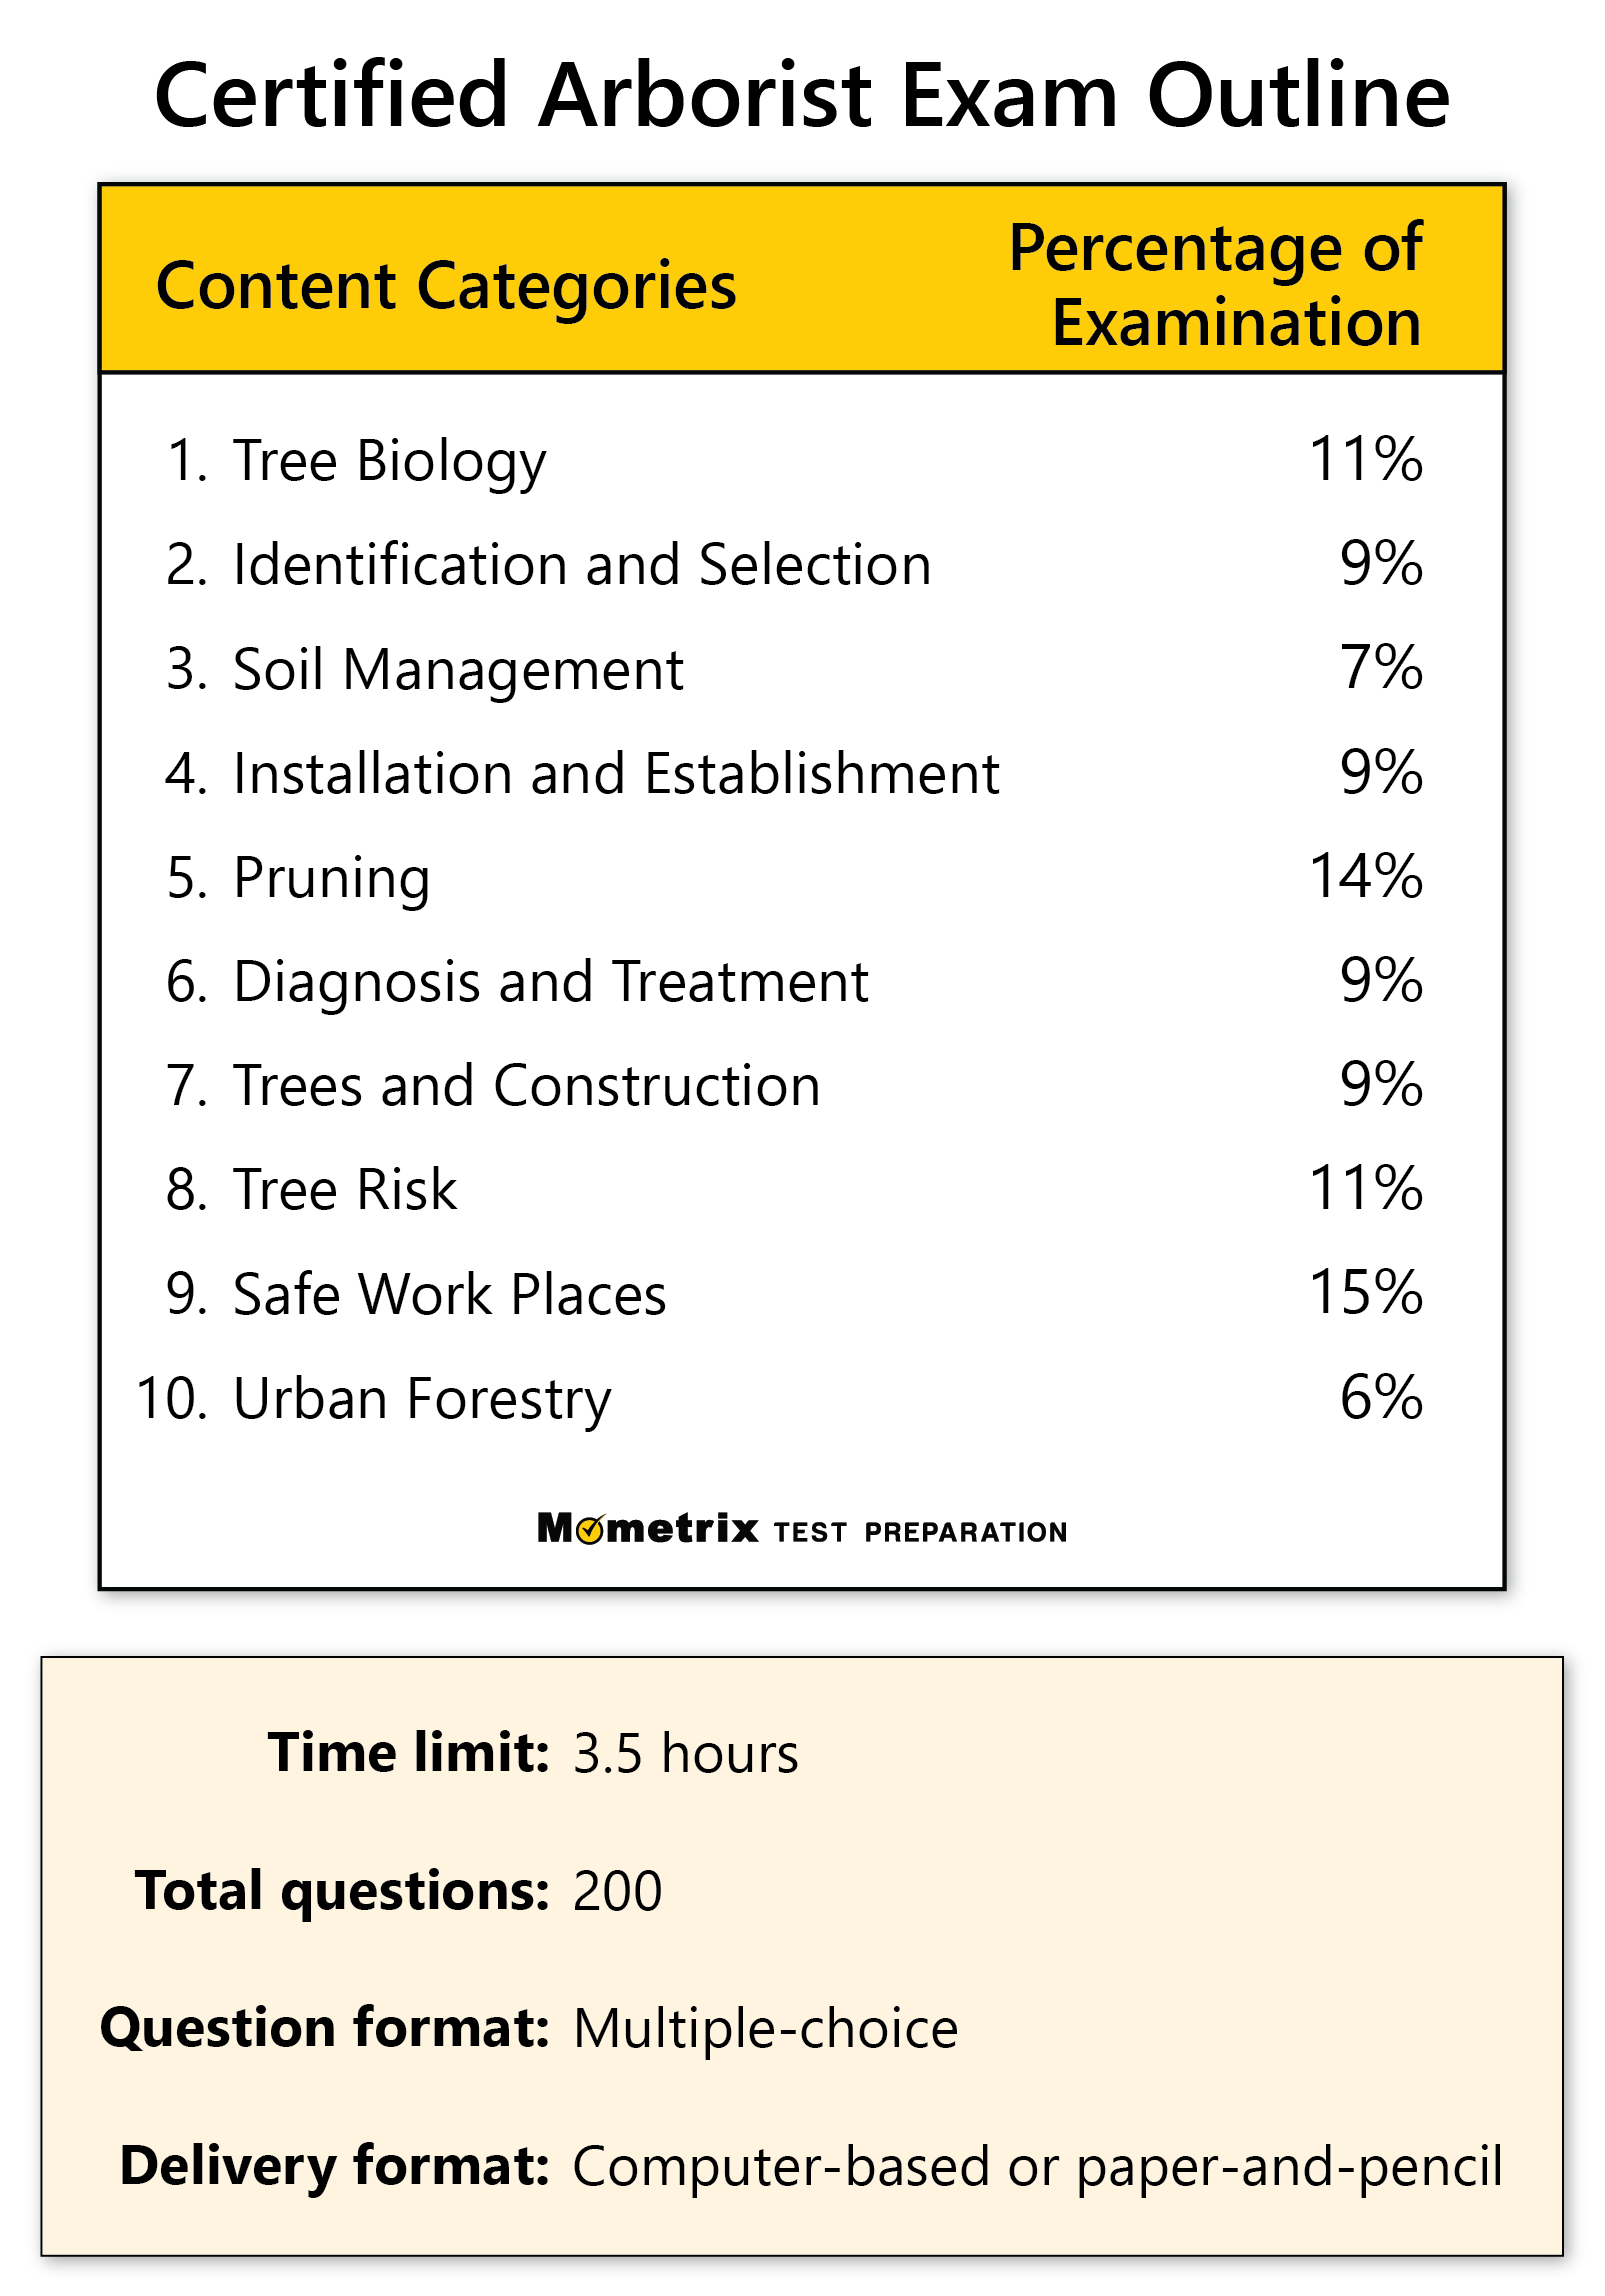 exam outline for the ISA Certified Arborist exam, which contains 200 multiple-choice questions and has a time limit of 3.5 hours